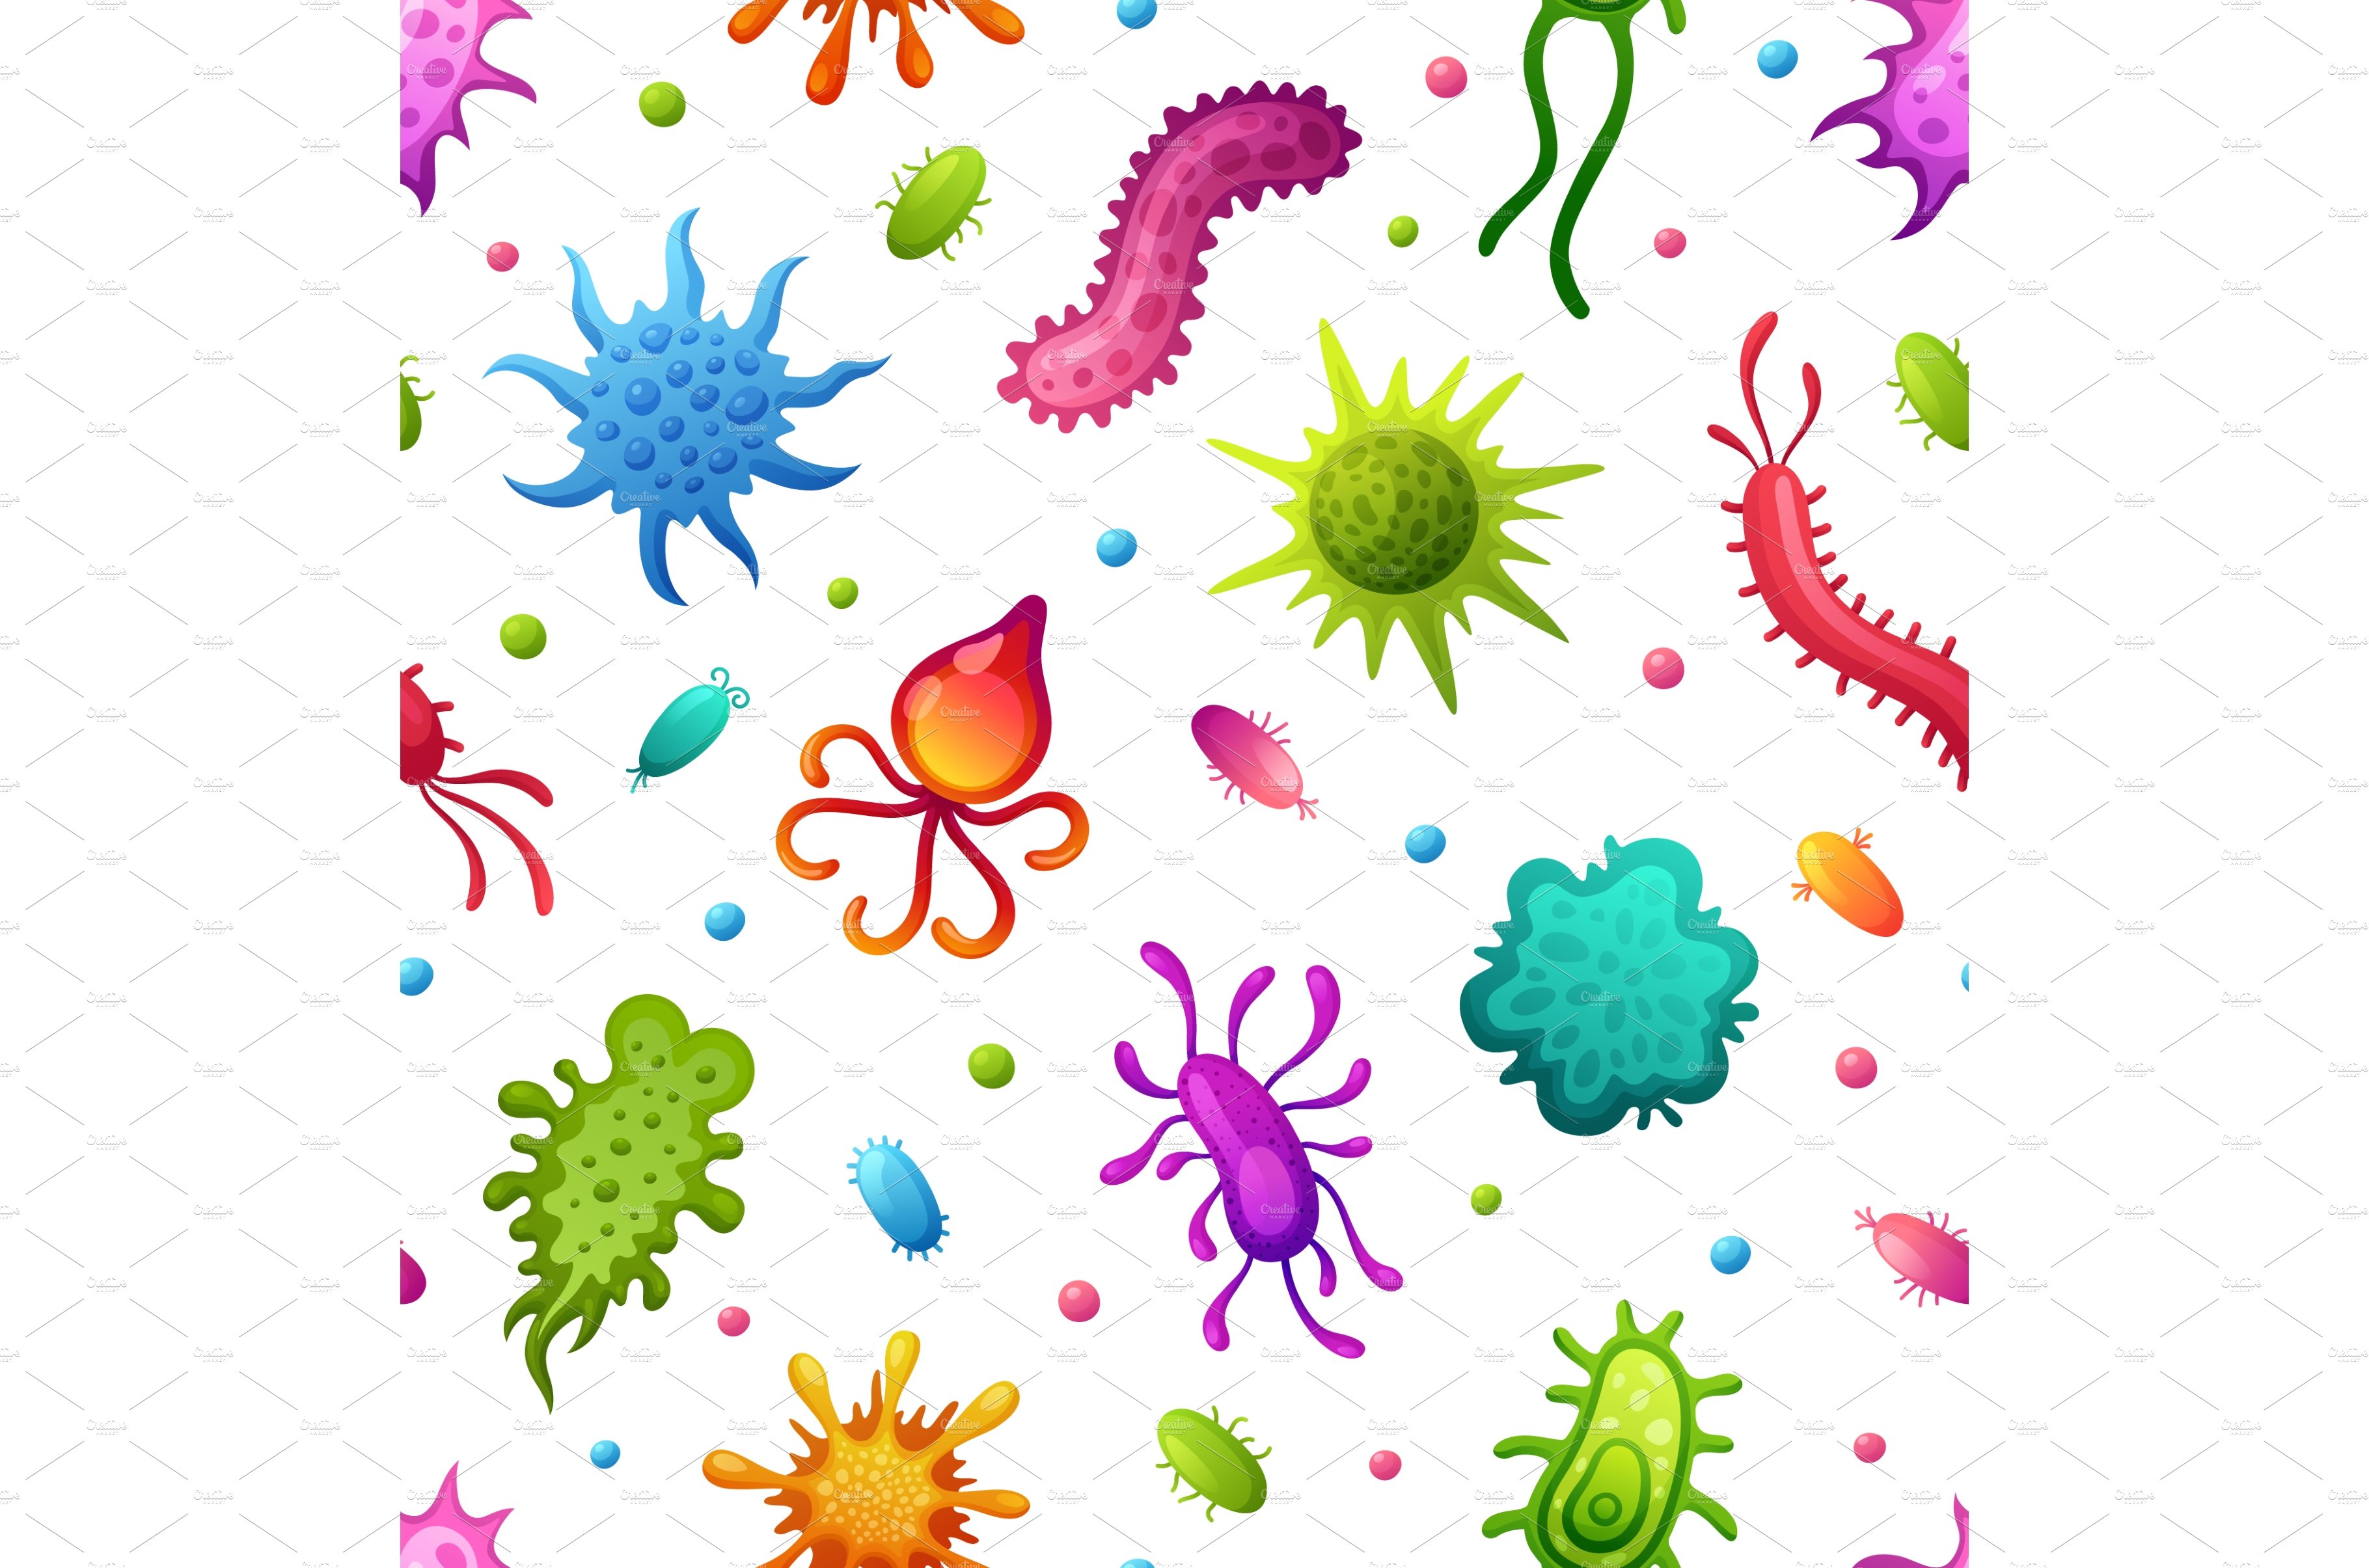 Microbes pattern. Cartoon microbe cover image.